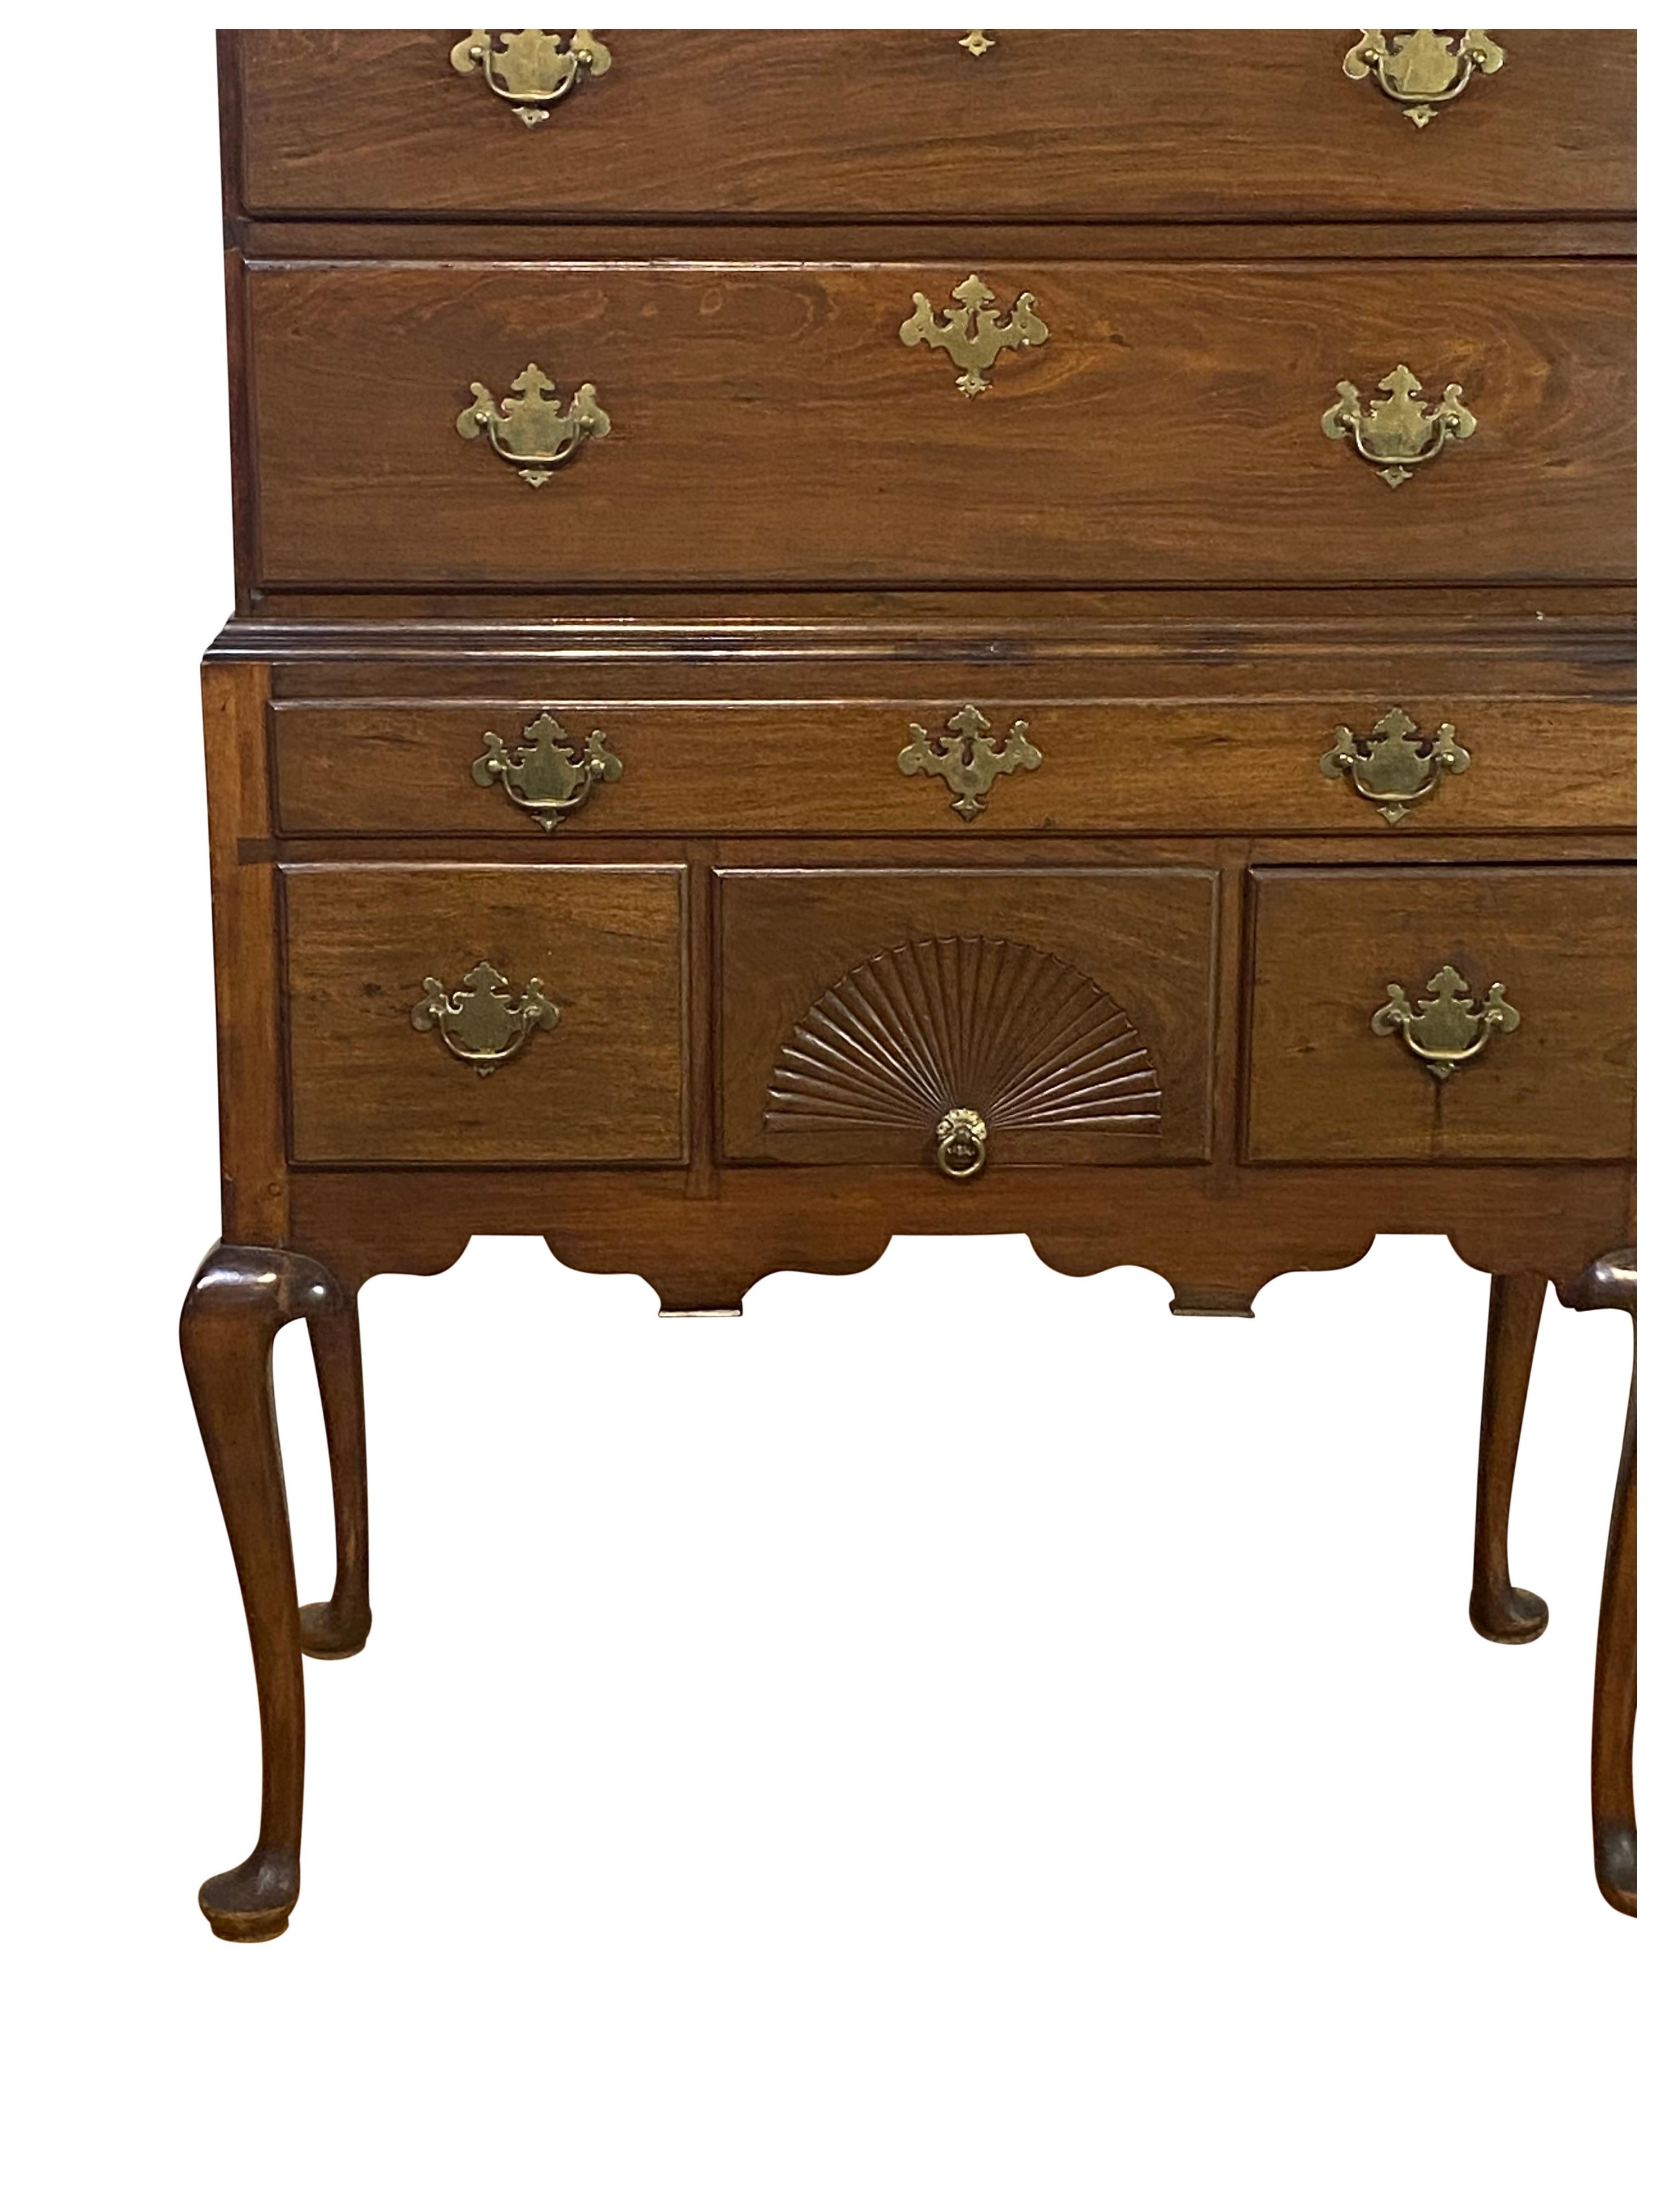 New England highboy with fan set in skirt, elegant proportions. I have no tolerance for a mediocre high chest, the legs are original and seem to be birch (New England frugality-sides are also birch. This is a first rate highboy . Ask for a full